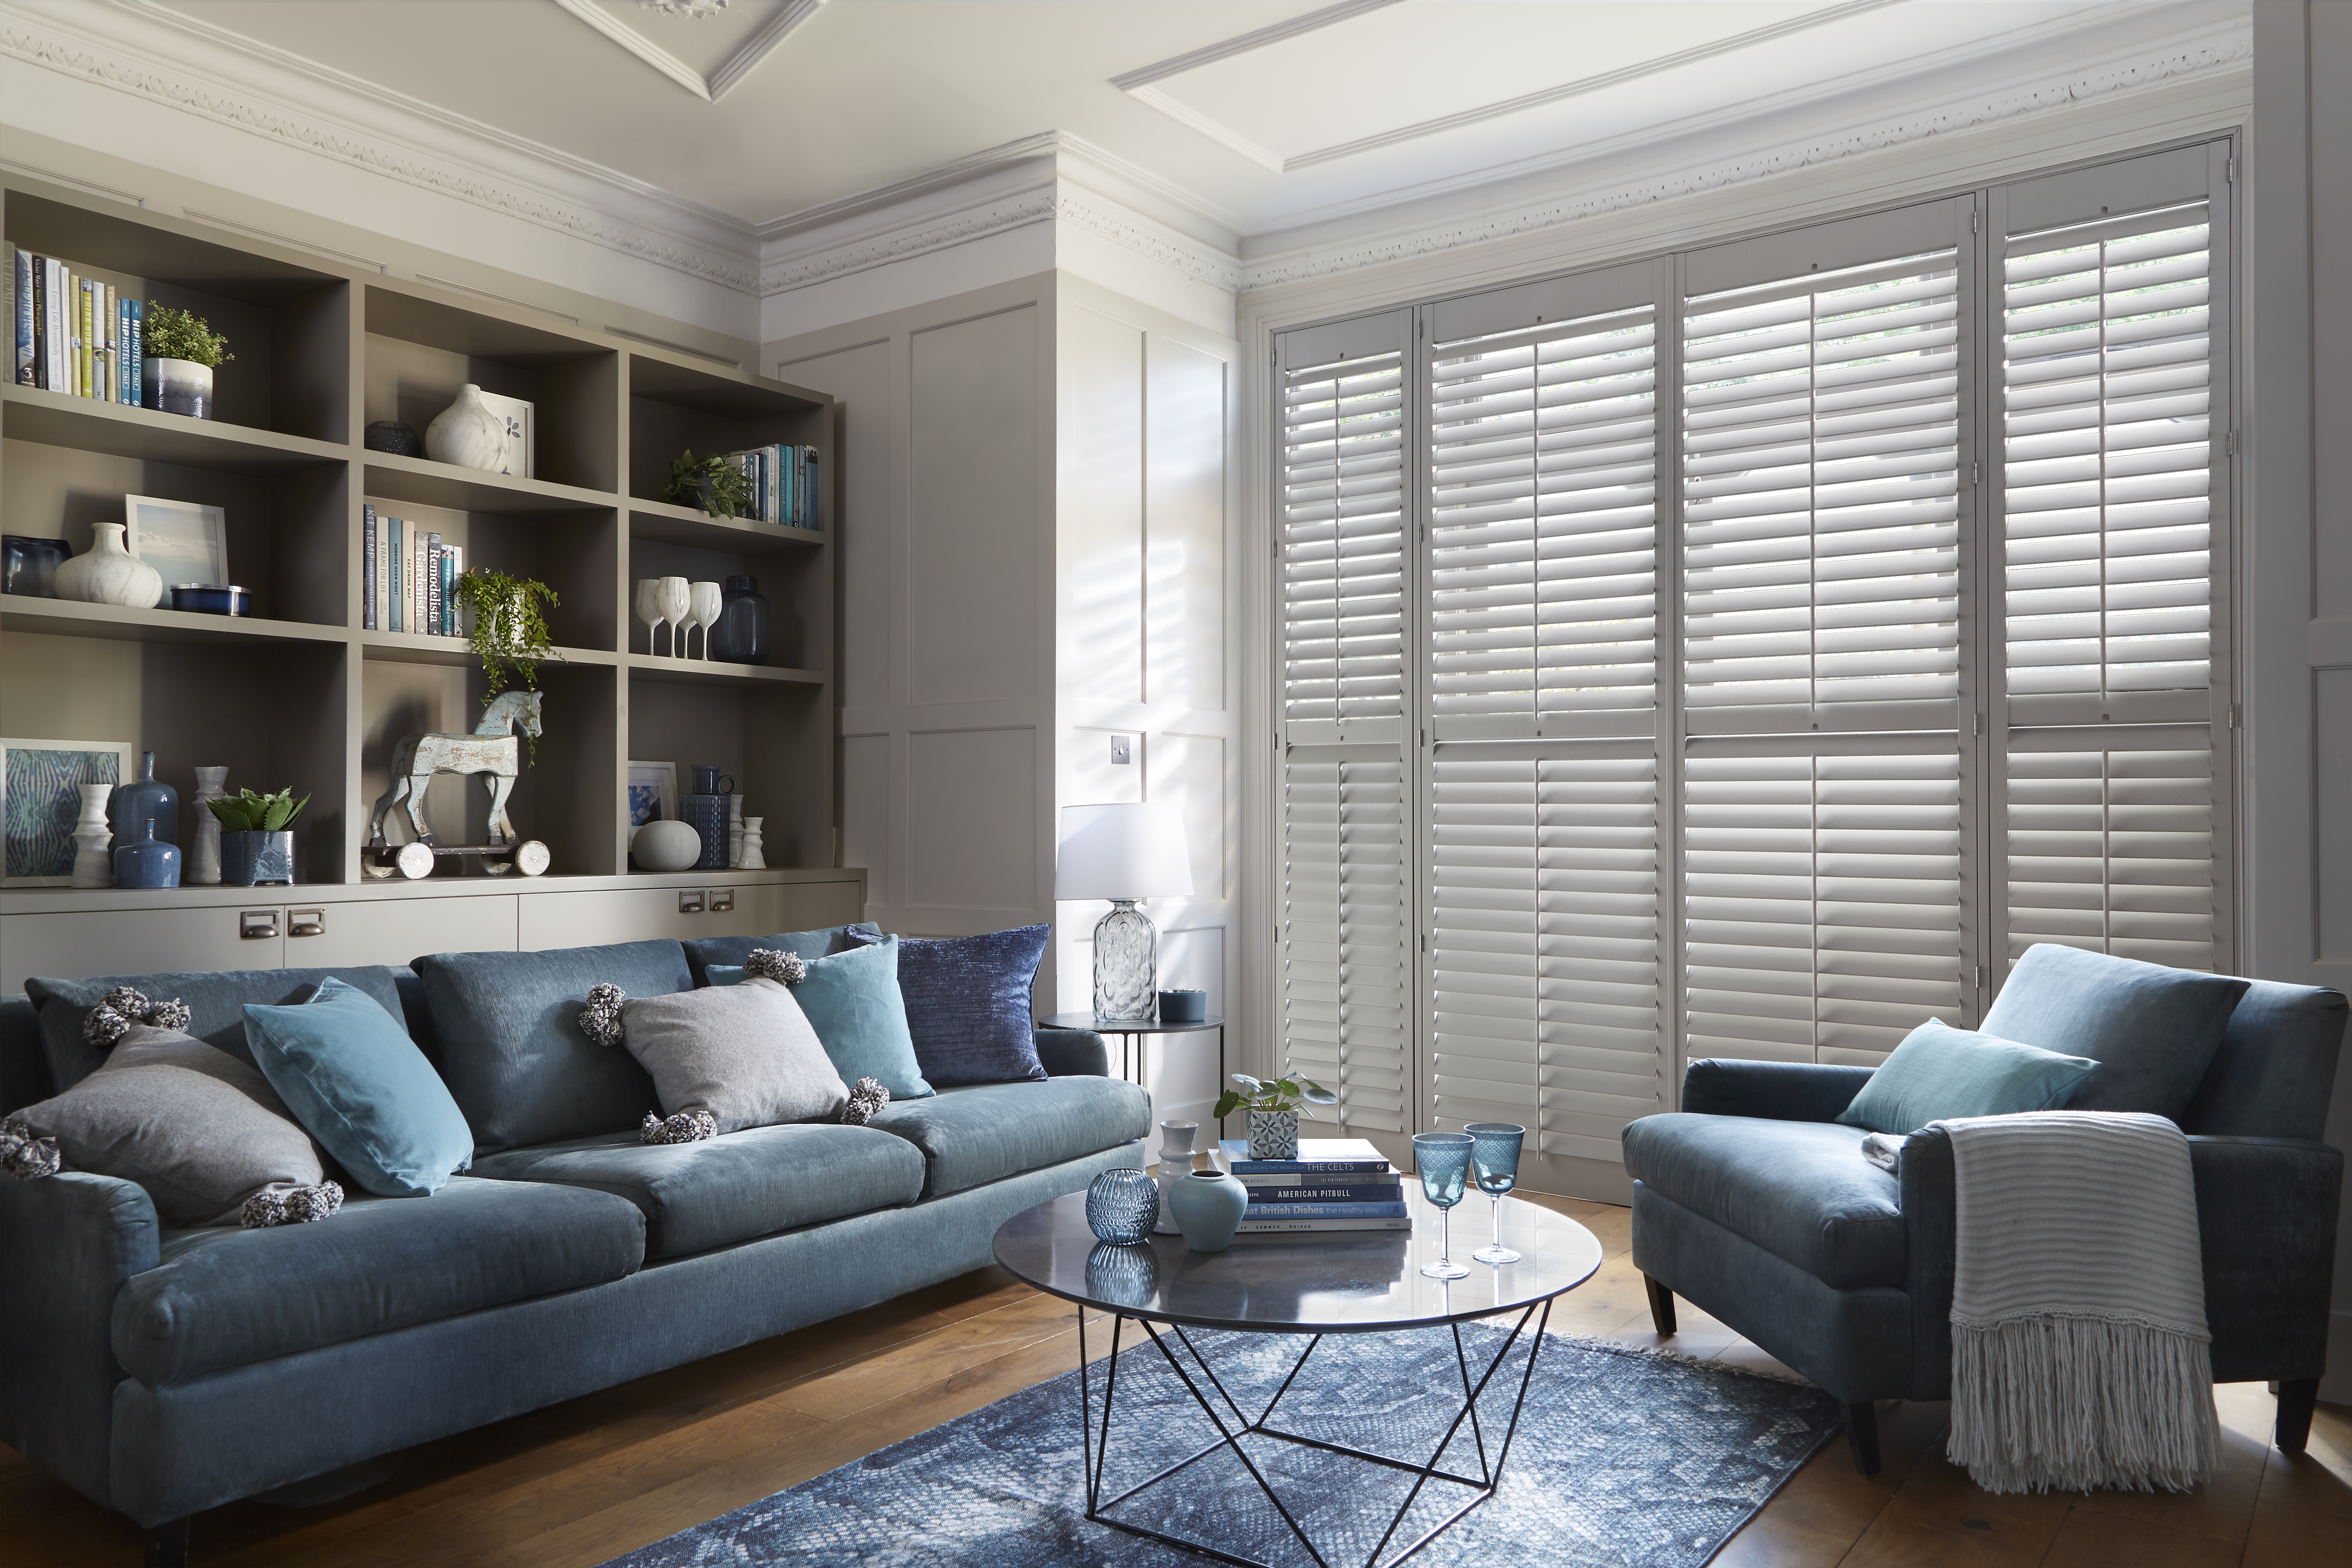 Coloured interior window Shutters in a Living Room